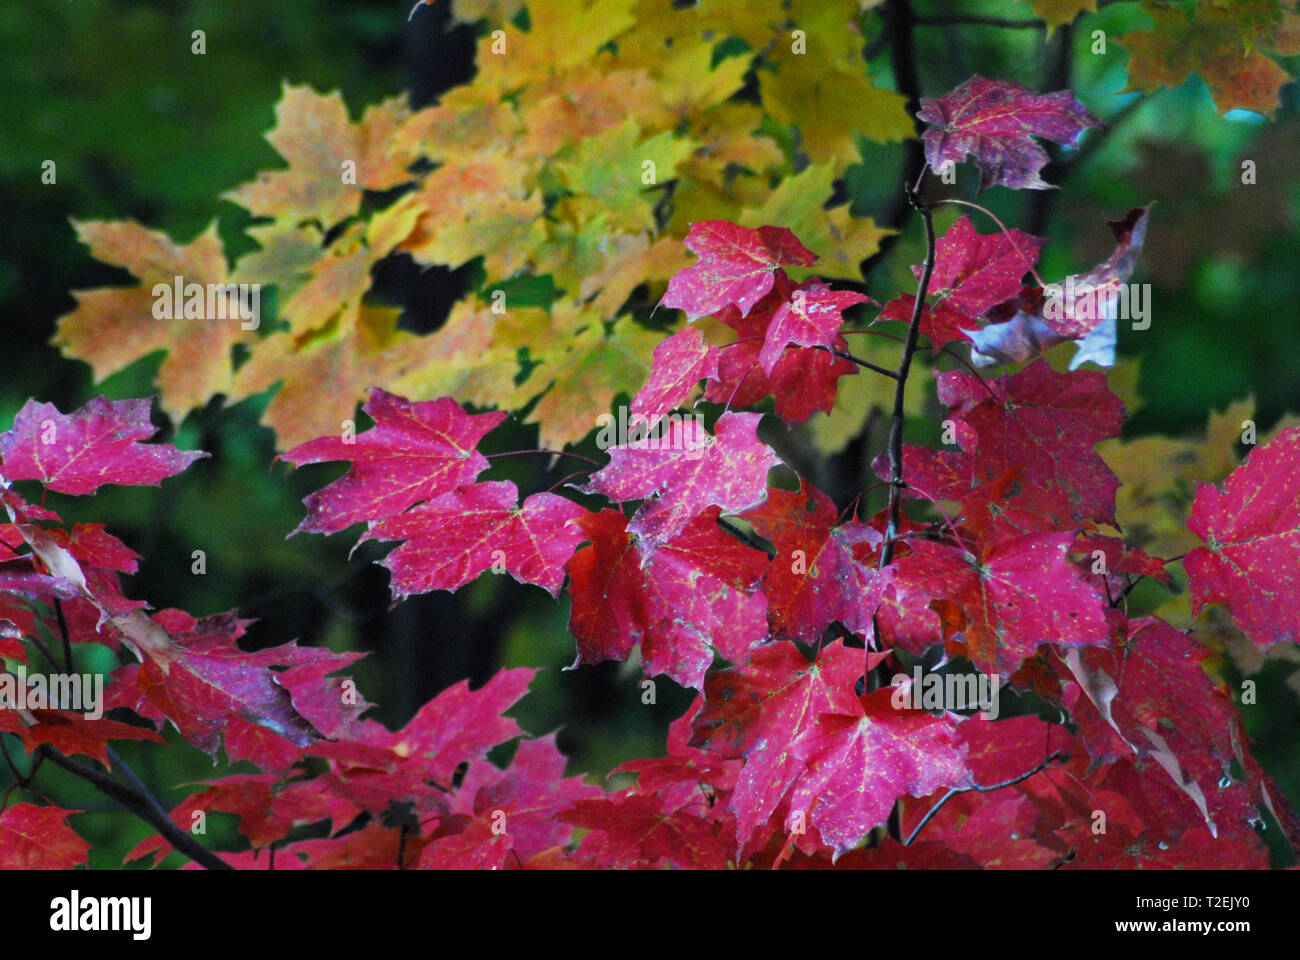 A close up of beautiful autumn red and yellow Maple leaves in New York state. Stock Photo